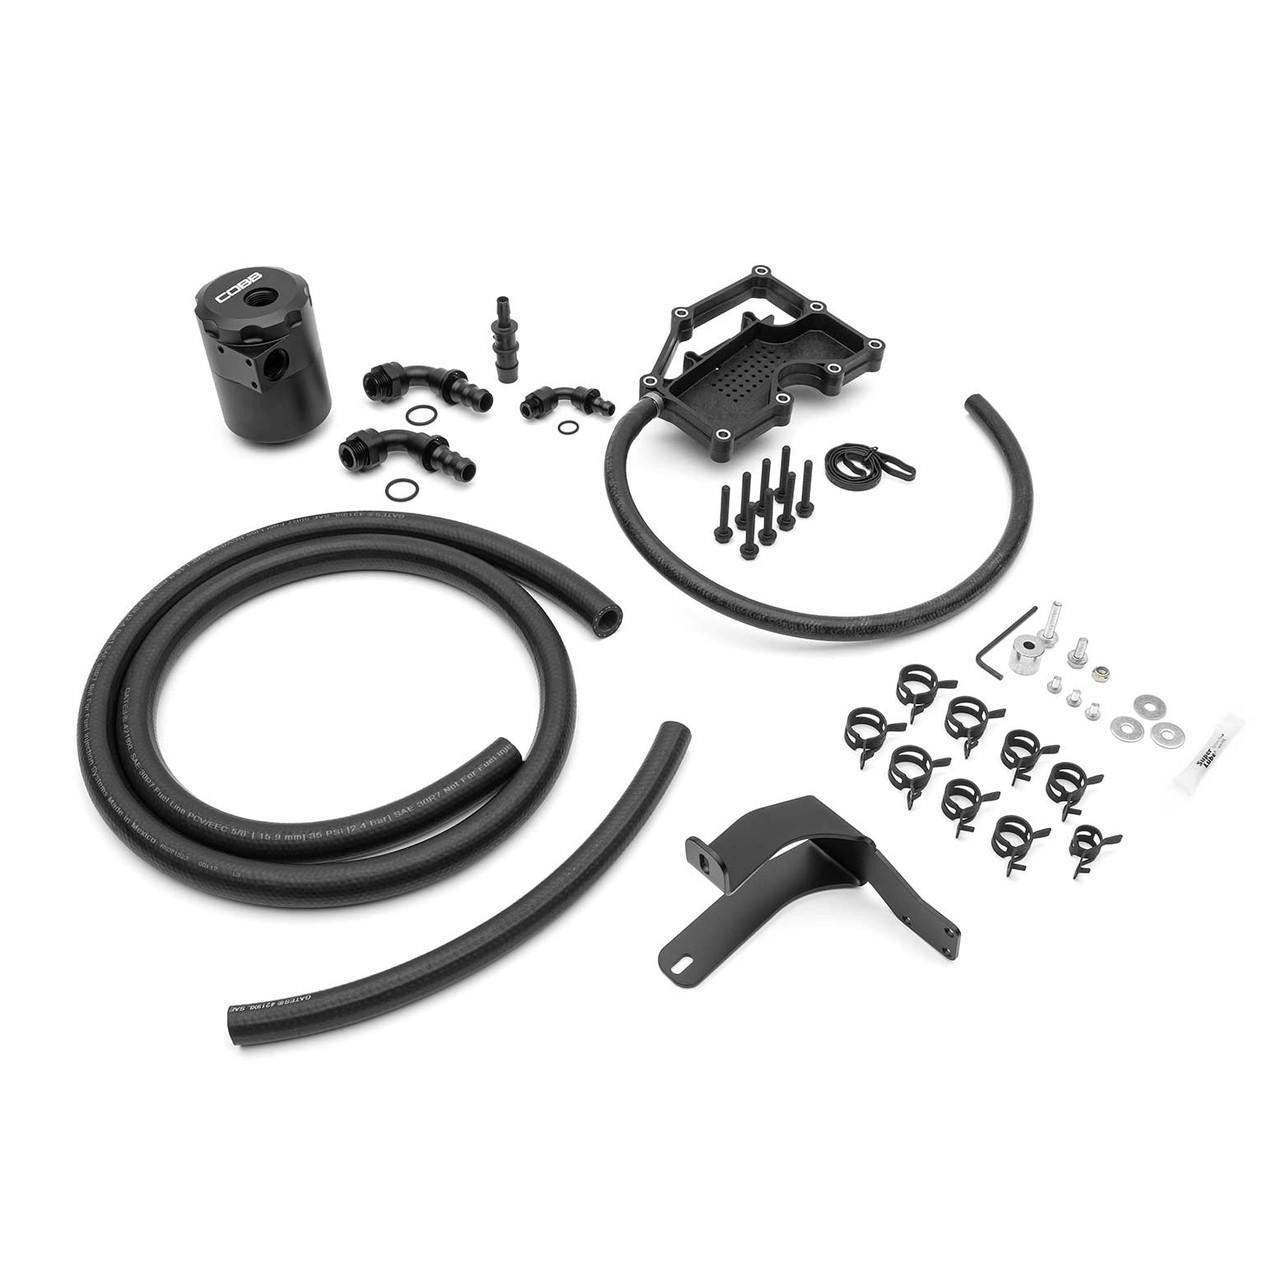 COBB Tuning COBB Air/Oil Separator for 2015-2023 Ford Ecoboost Mustang 8M1600 